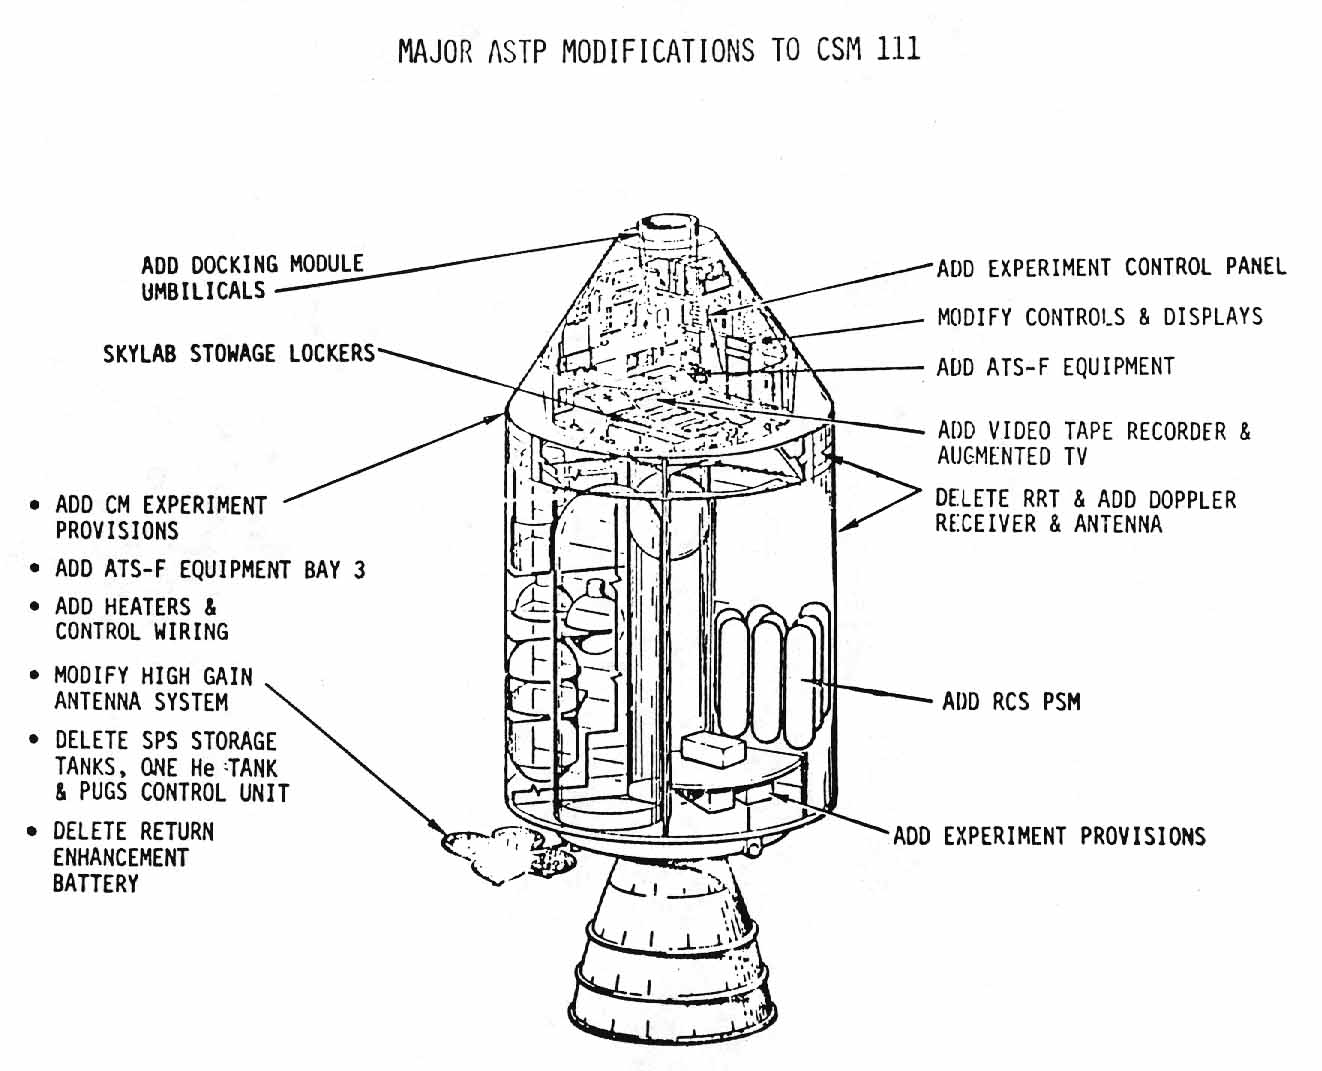 cross-sectional drawing of the ASTP  modifications